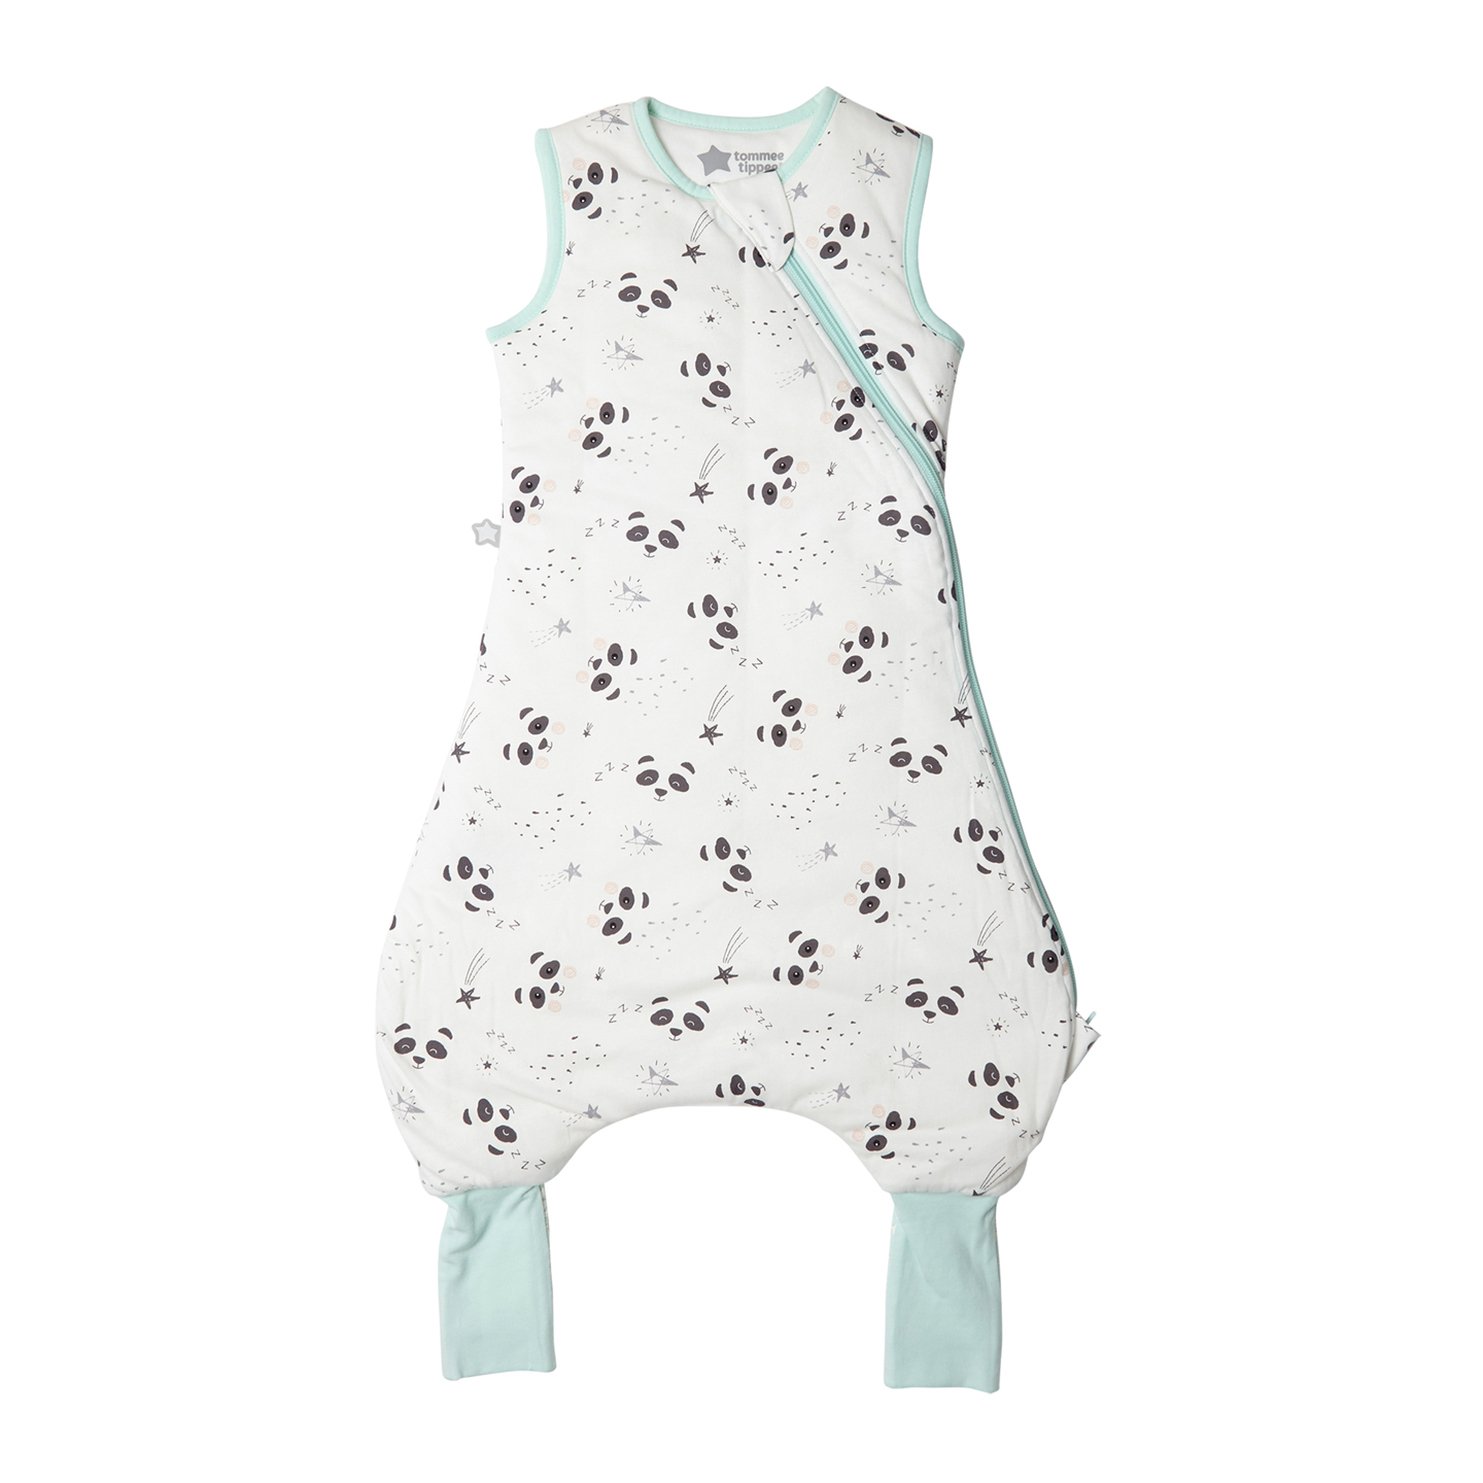 Tommee Tippee Steppee Baby Romper 18-36m, 1 Tog Little Pip Review